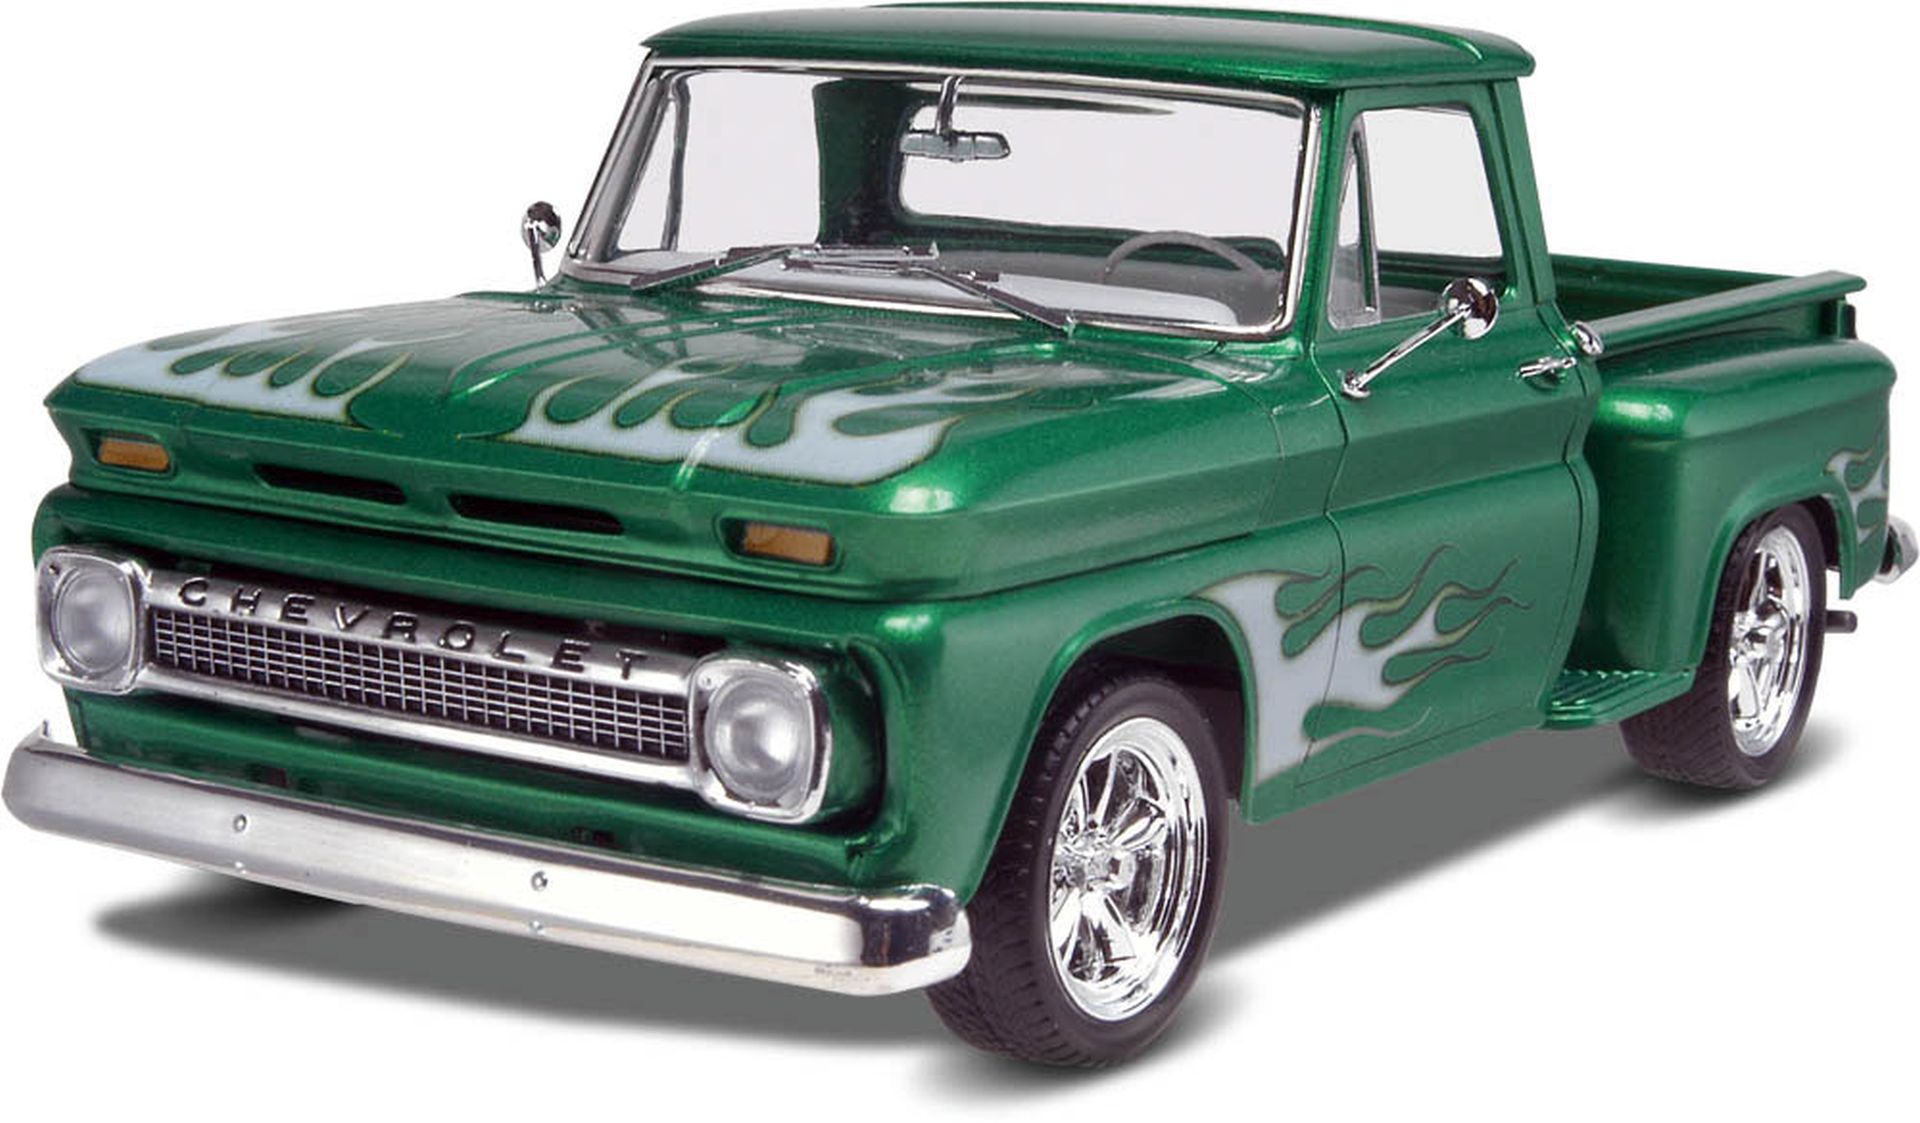 Revell 17210 - 1965 Chevy Step Side